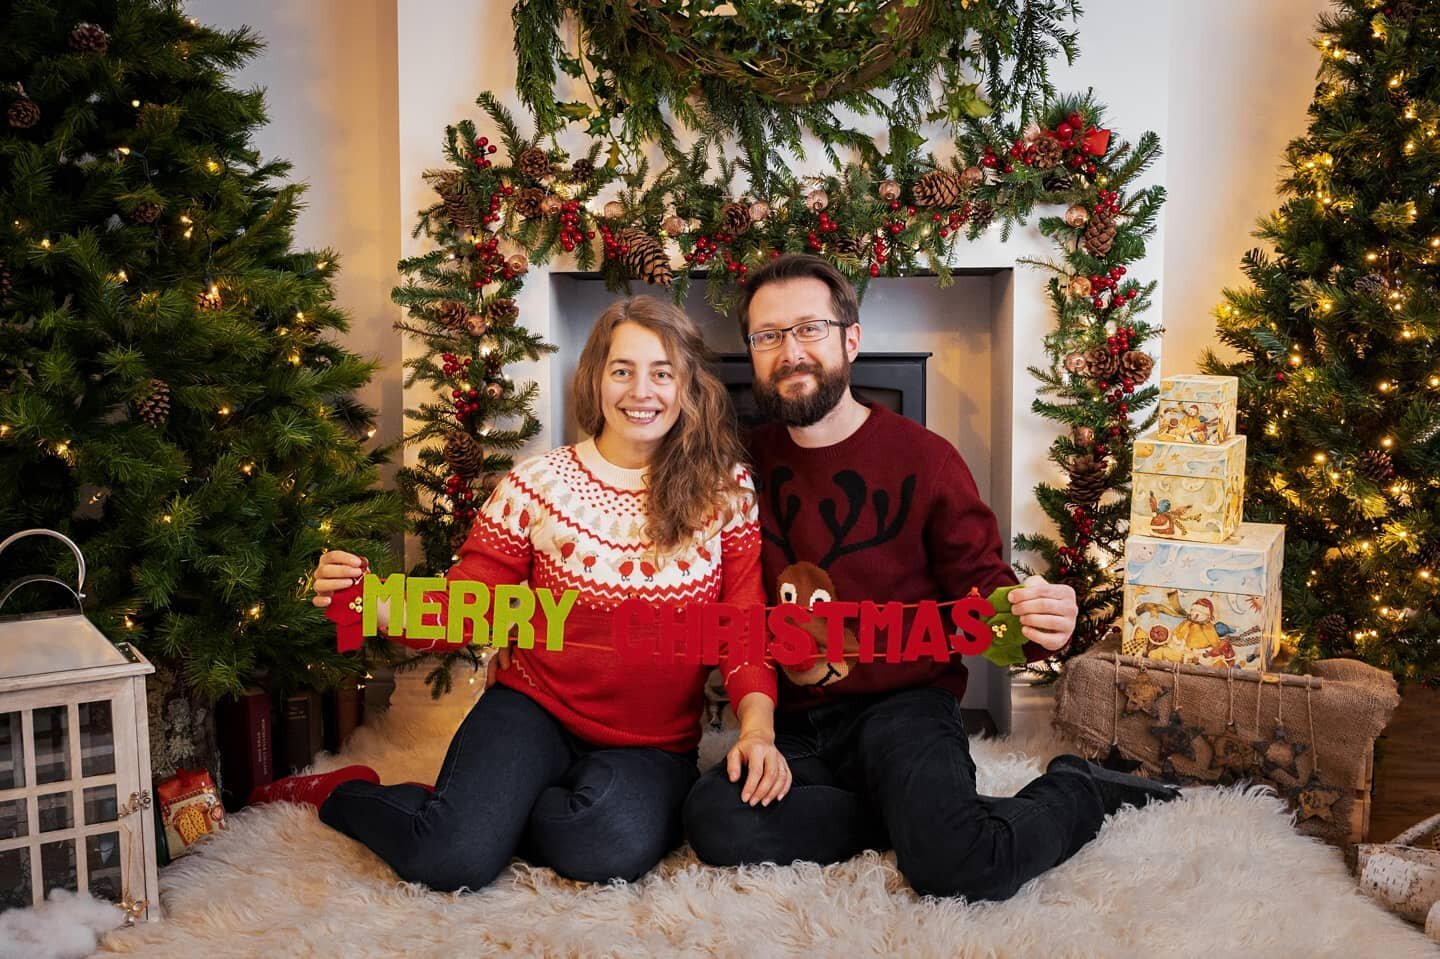 🎄Happy Holidays to all of you out there!🎄We can't wait to see what #2021 is going to bring. 
Stay safe and be happy!🙏
Thank you so much for all of your love and support. 🌟

Love,
Adrienne and Lucian 

www.adriennephotography.co.uk 

.
.
.
.
#hamp